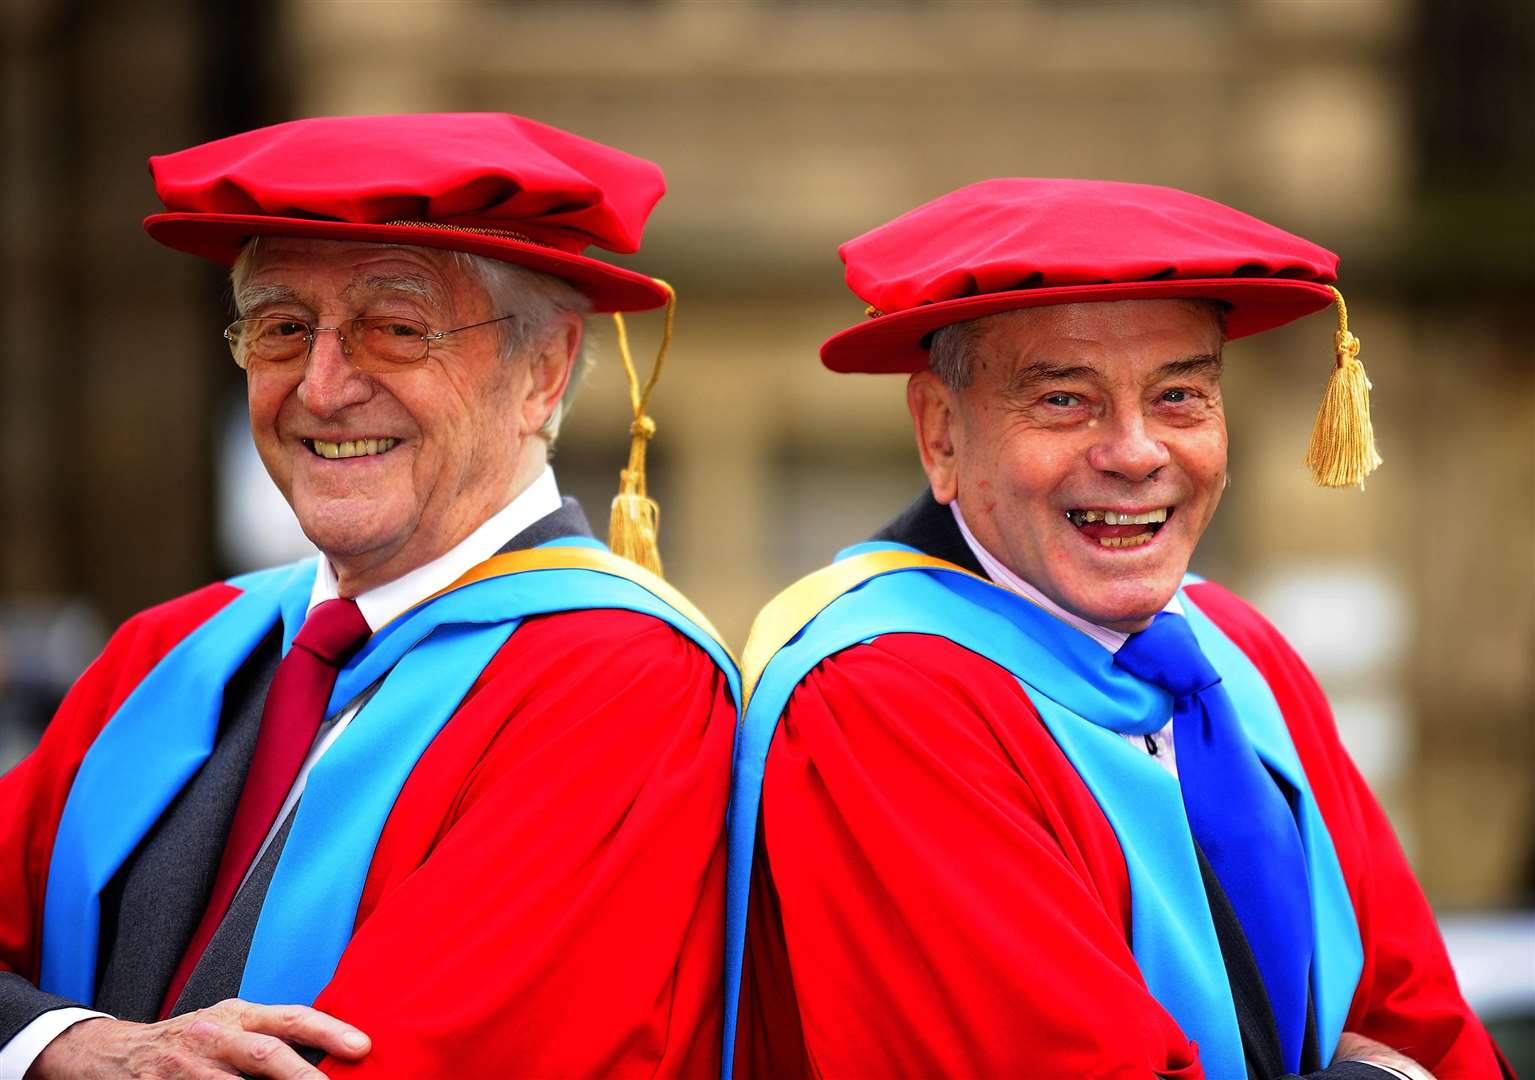 Sir Michael Parkinson (left) and Dickie Bird at the Huddersfield University campus in Barnsley, where they received honorary doctorates (PA)